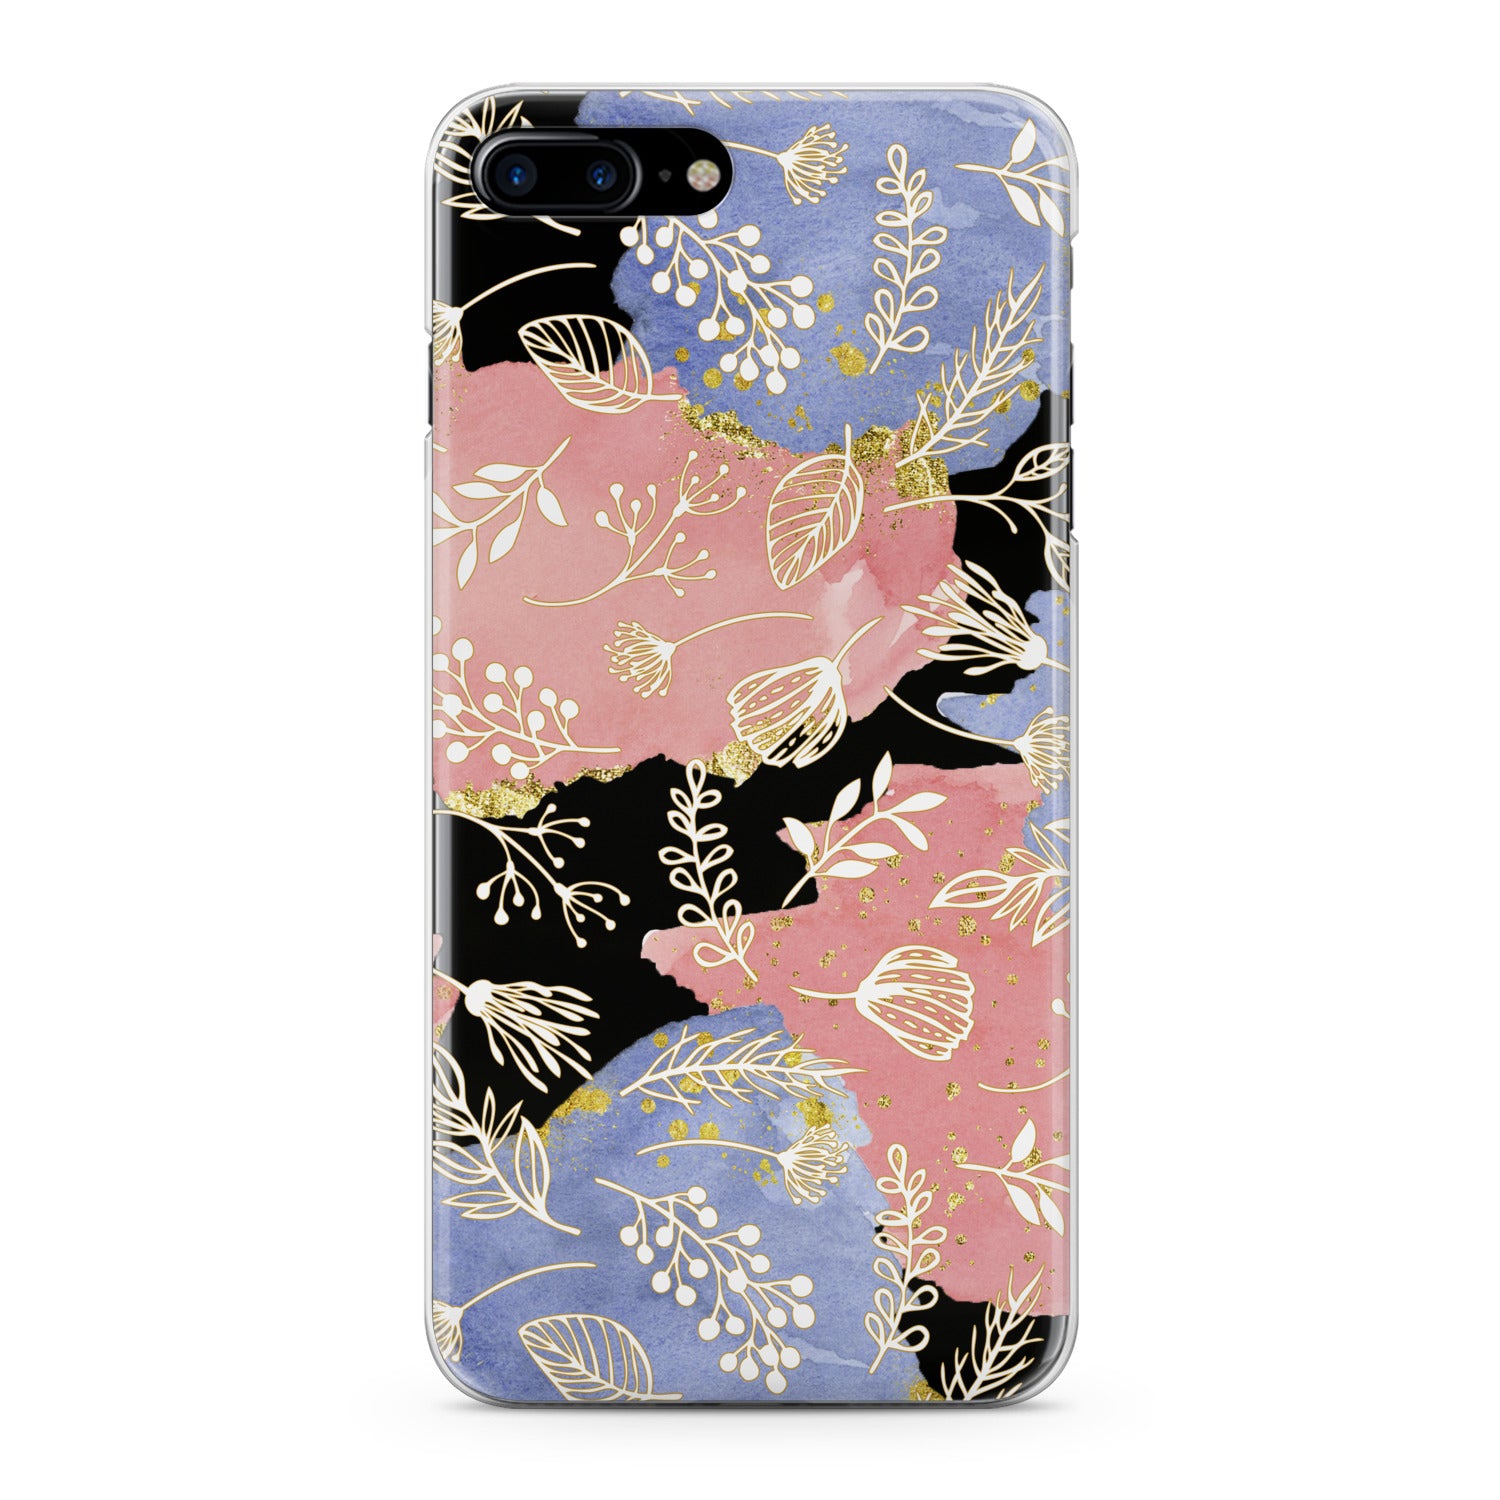 Lex Altern Golden Plants Phone Case for your iPhone & Android phone.